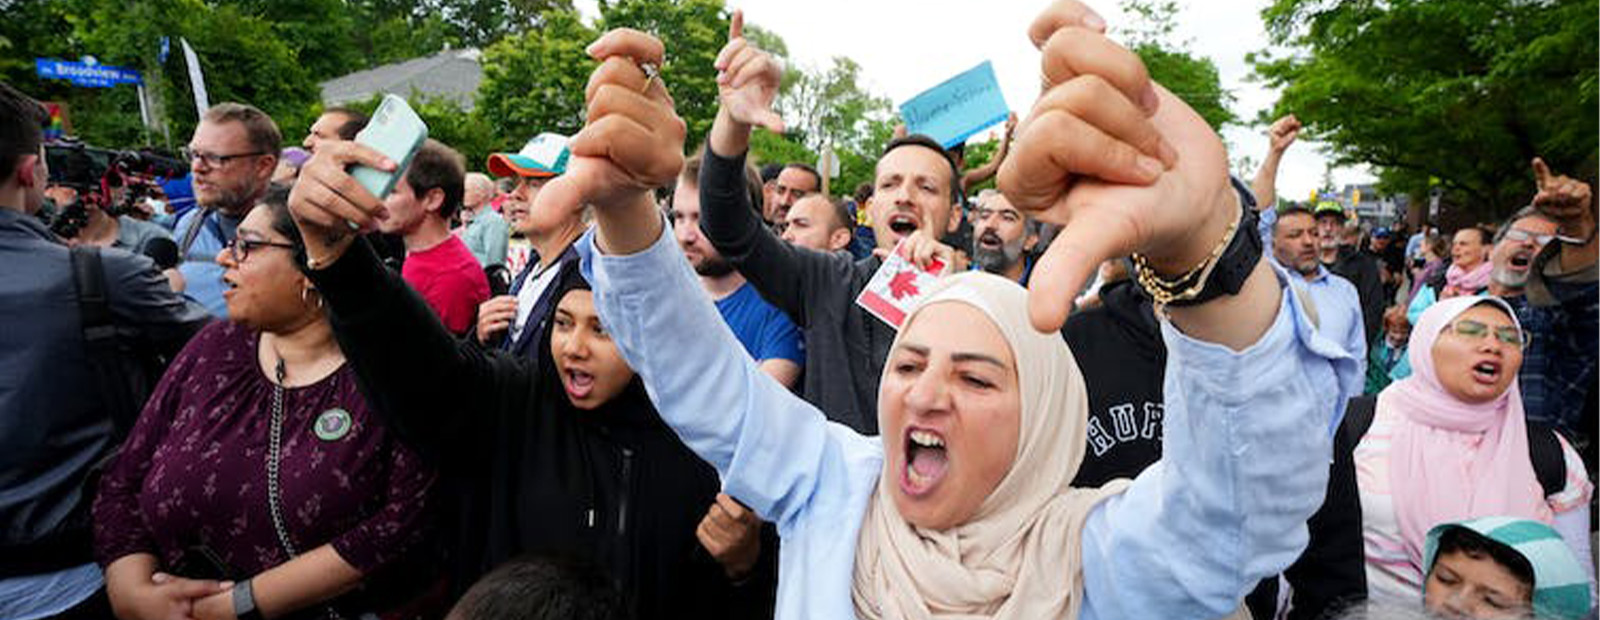 A protester in a crowd makes a thumbs-down gesture